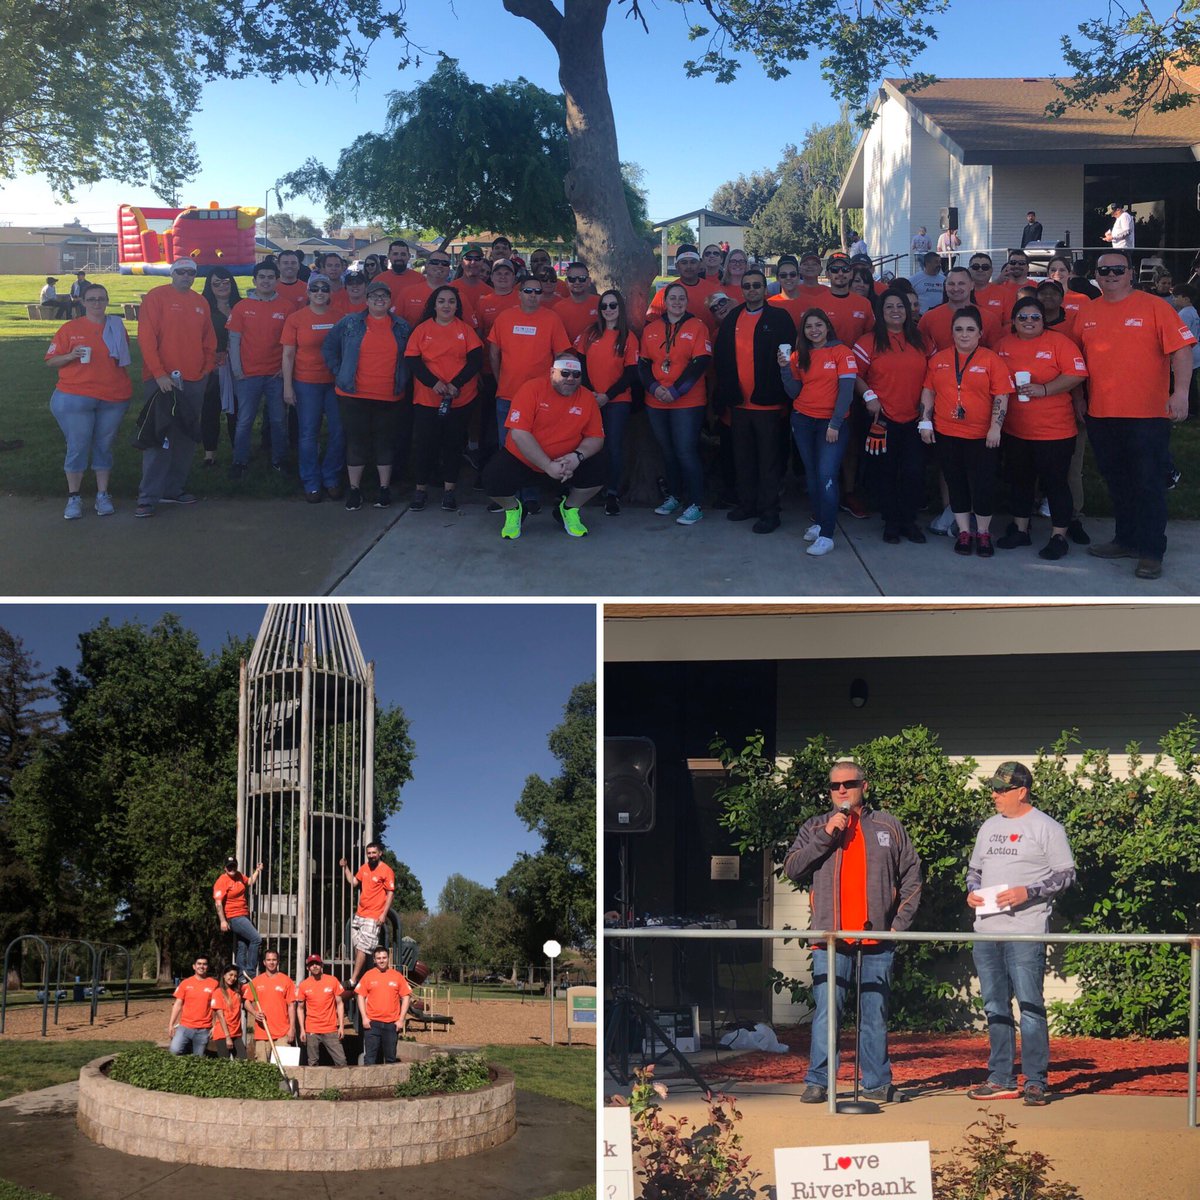 Great Turnout to Love Riverbank!#TeamDepot #D20 #SpringIntoService #TheBank1842